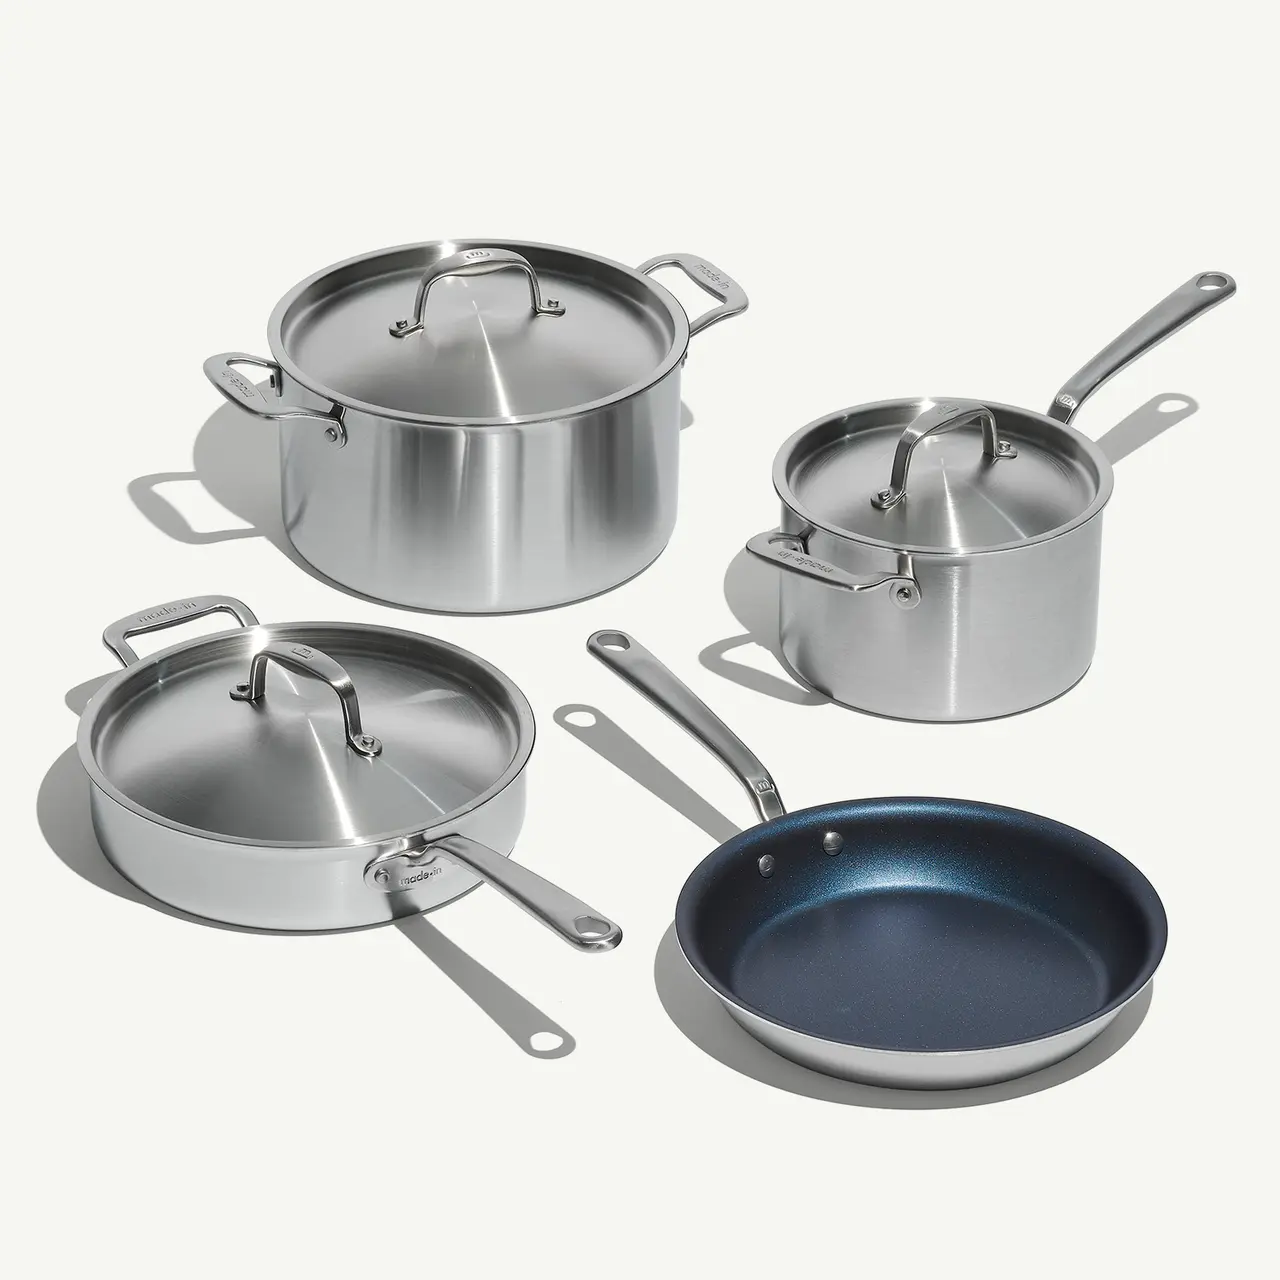 A set of stainless steel cookware with lids and a non-stick skillet on a light background.